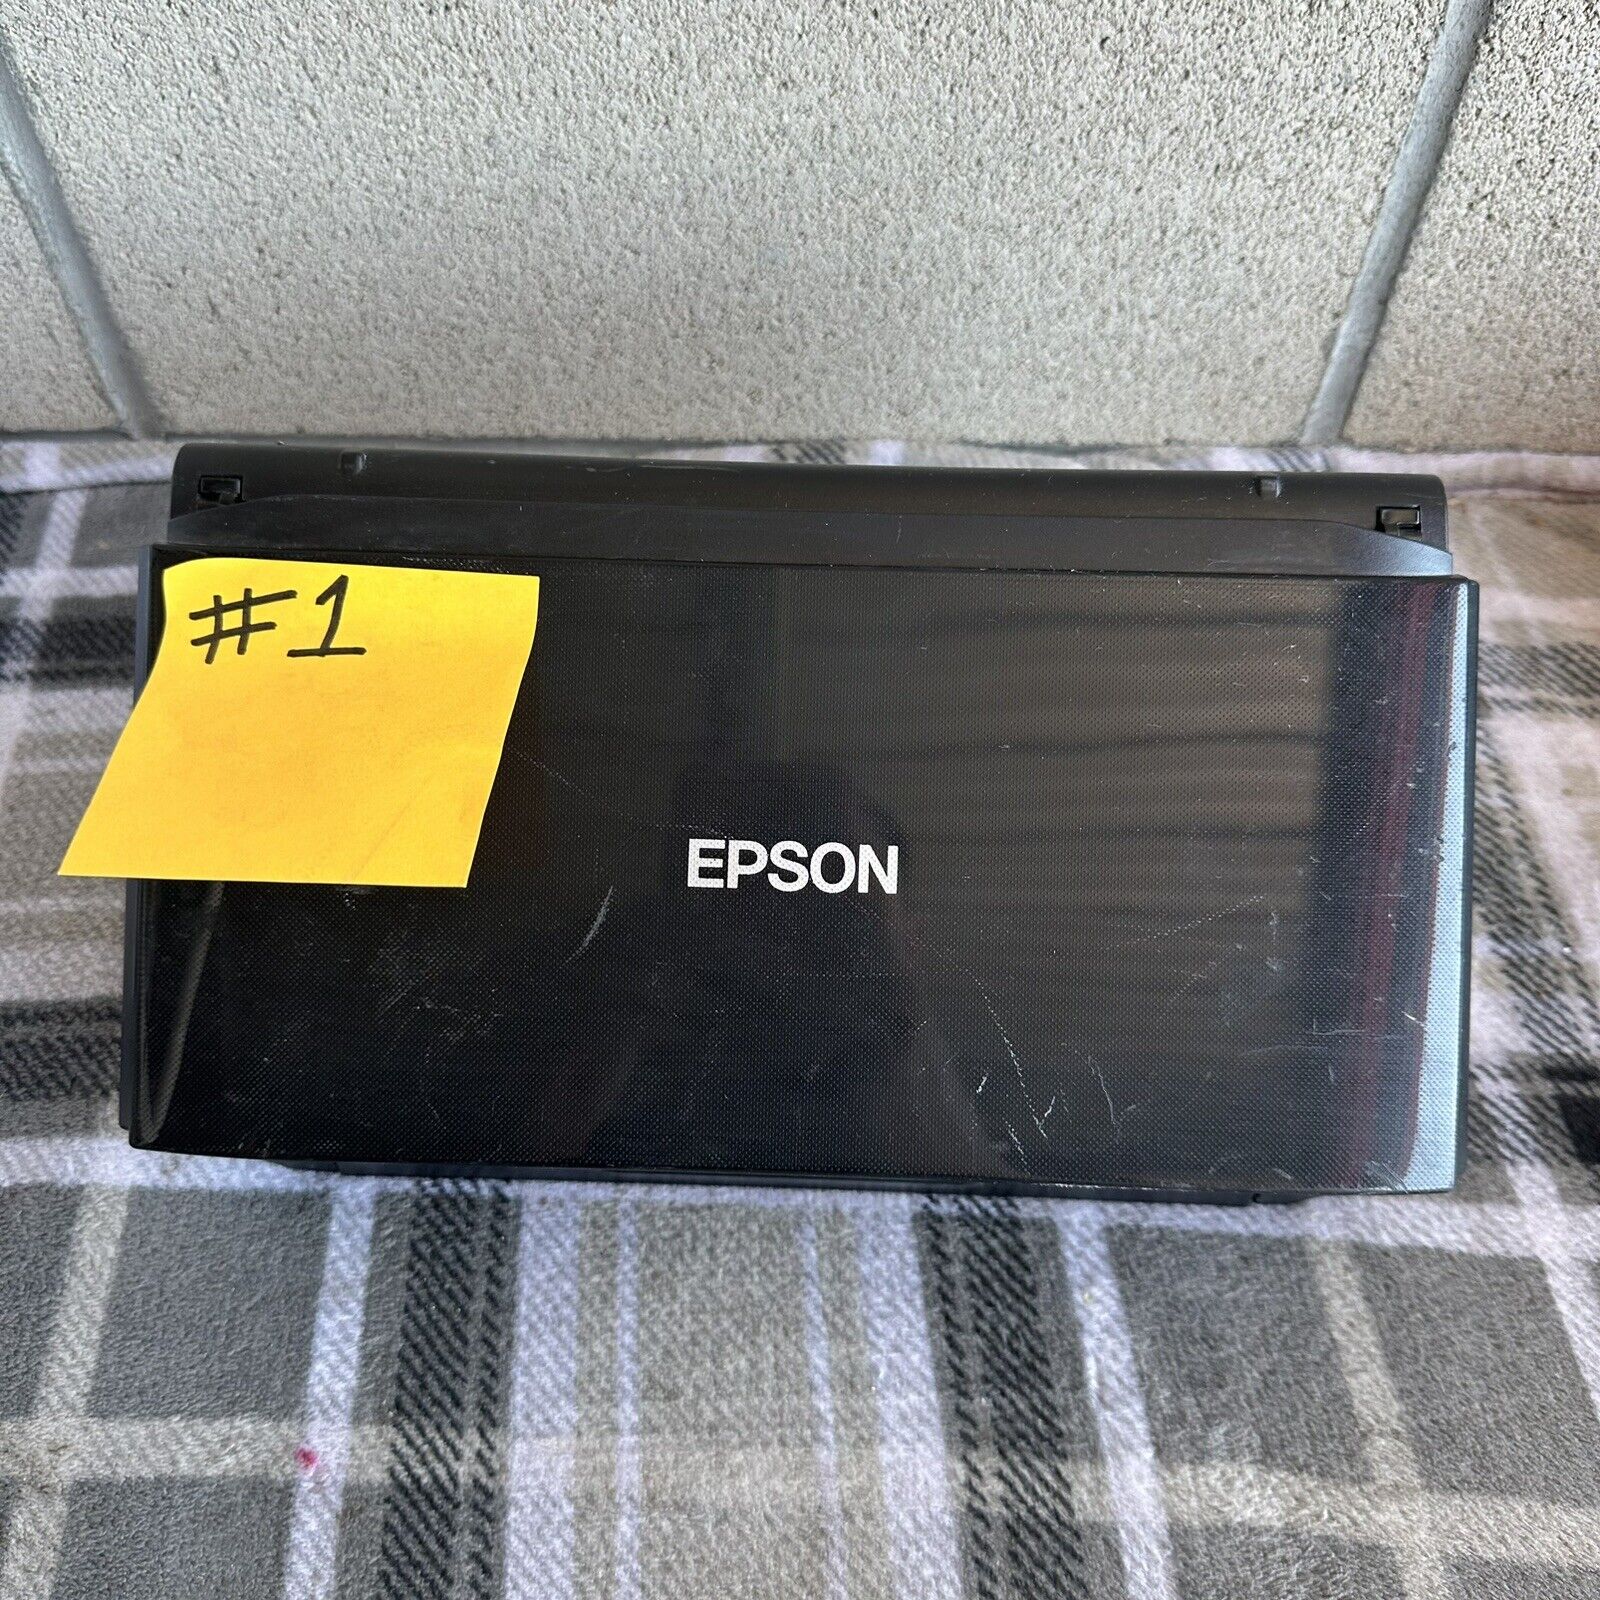 EPSON WORKFORCE DS-510 COLOR DOCUMENT SCANNER For Parts Or Repair - #1